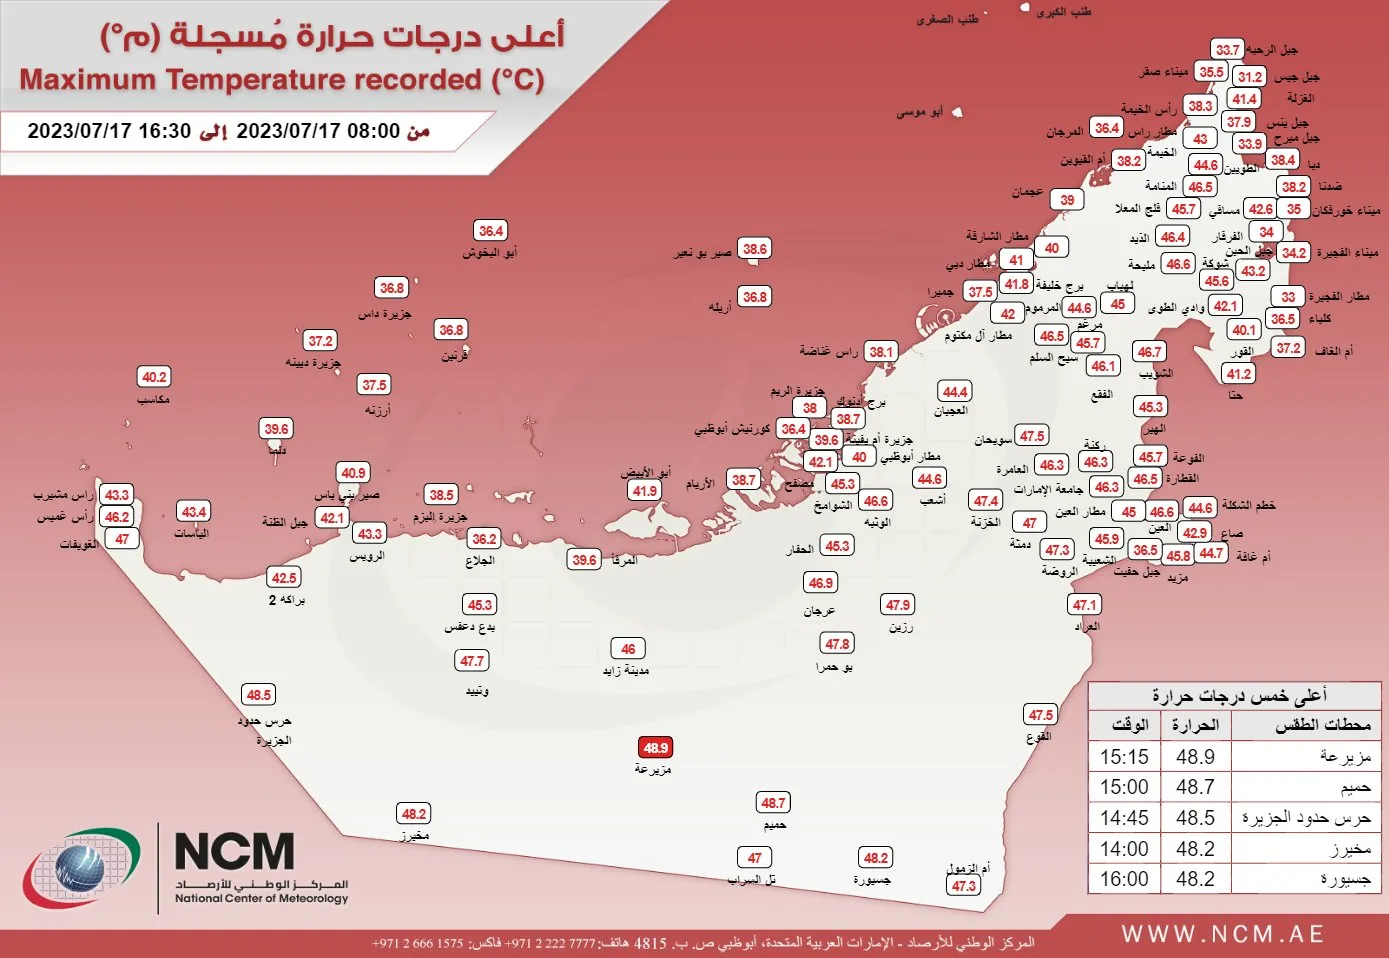 The highest temperature recorded over the country today is 48.9°C in Mezaira (Al Dhafra Region) at 15:15 UAE Local time.